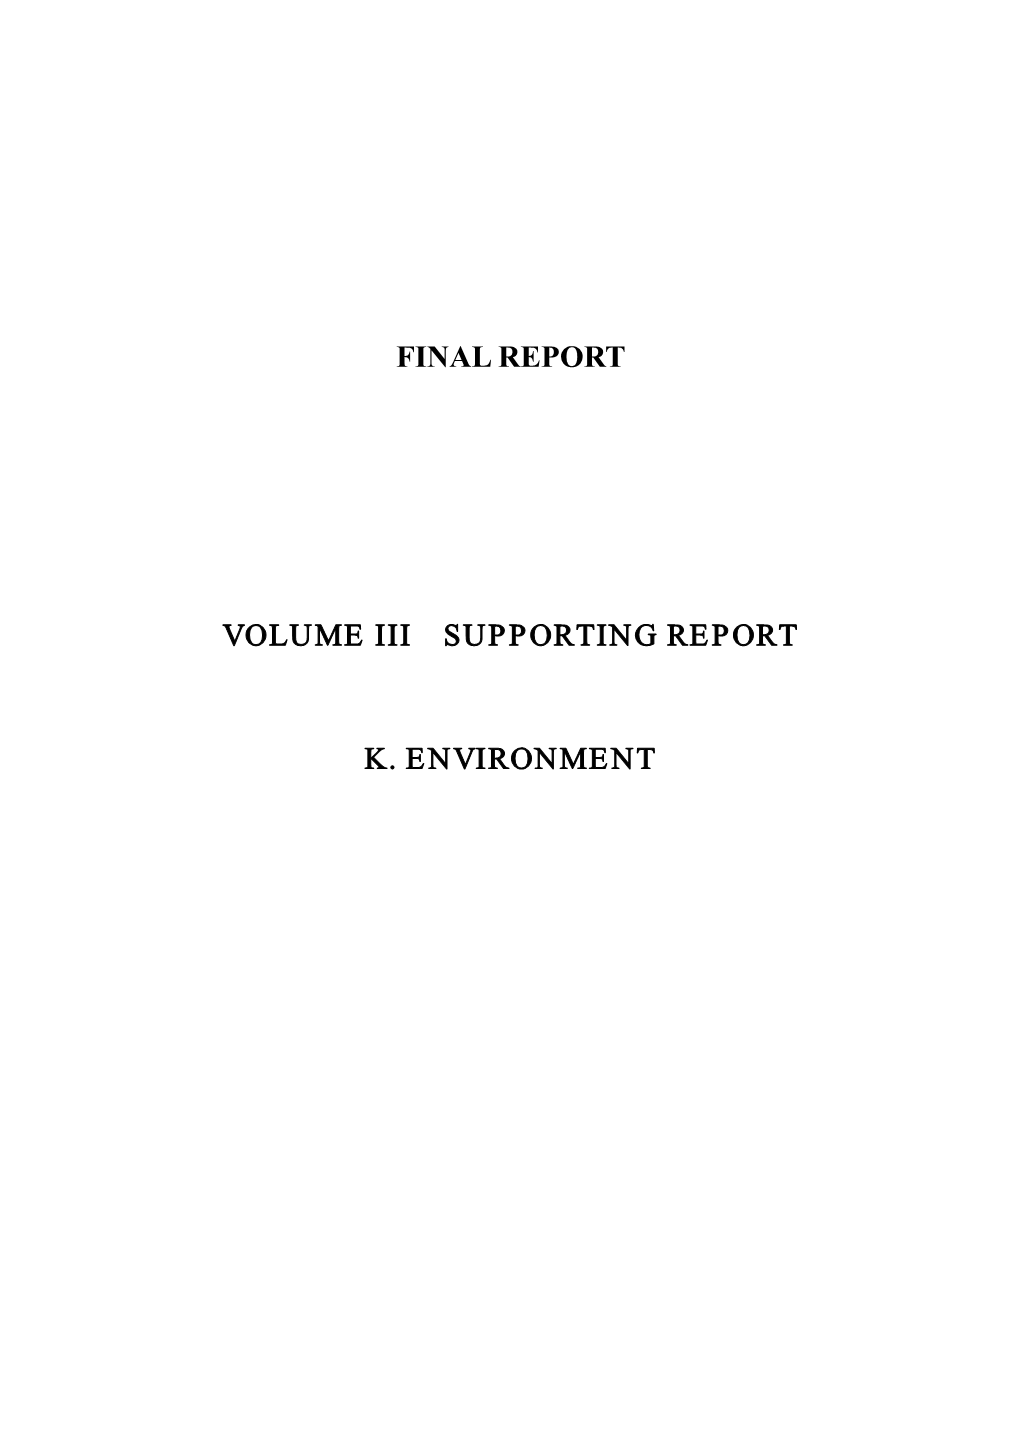 Final Report Volume Iii Supporting Report K. Environment